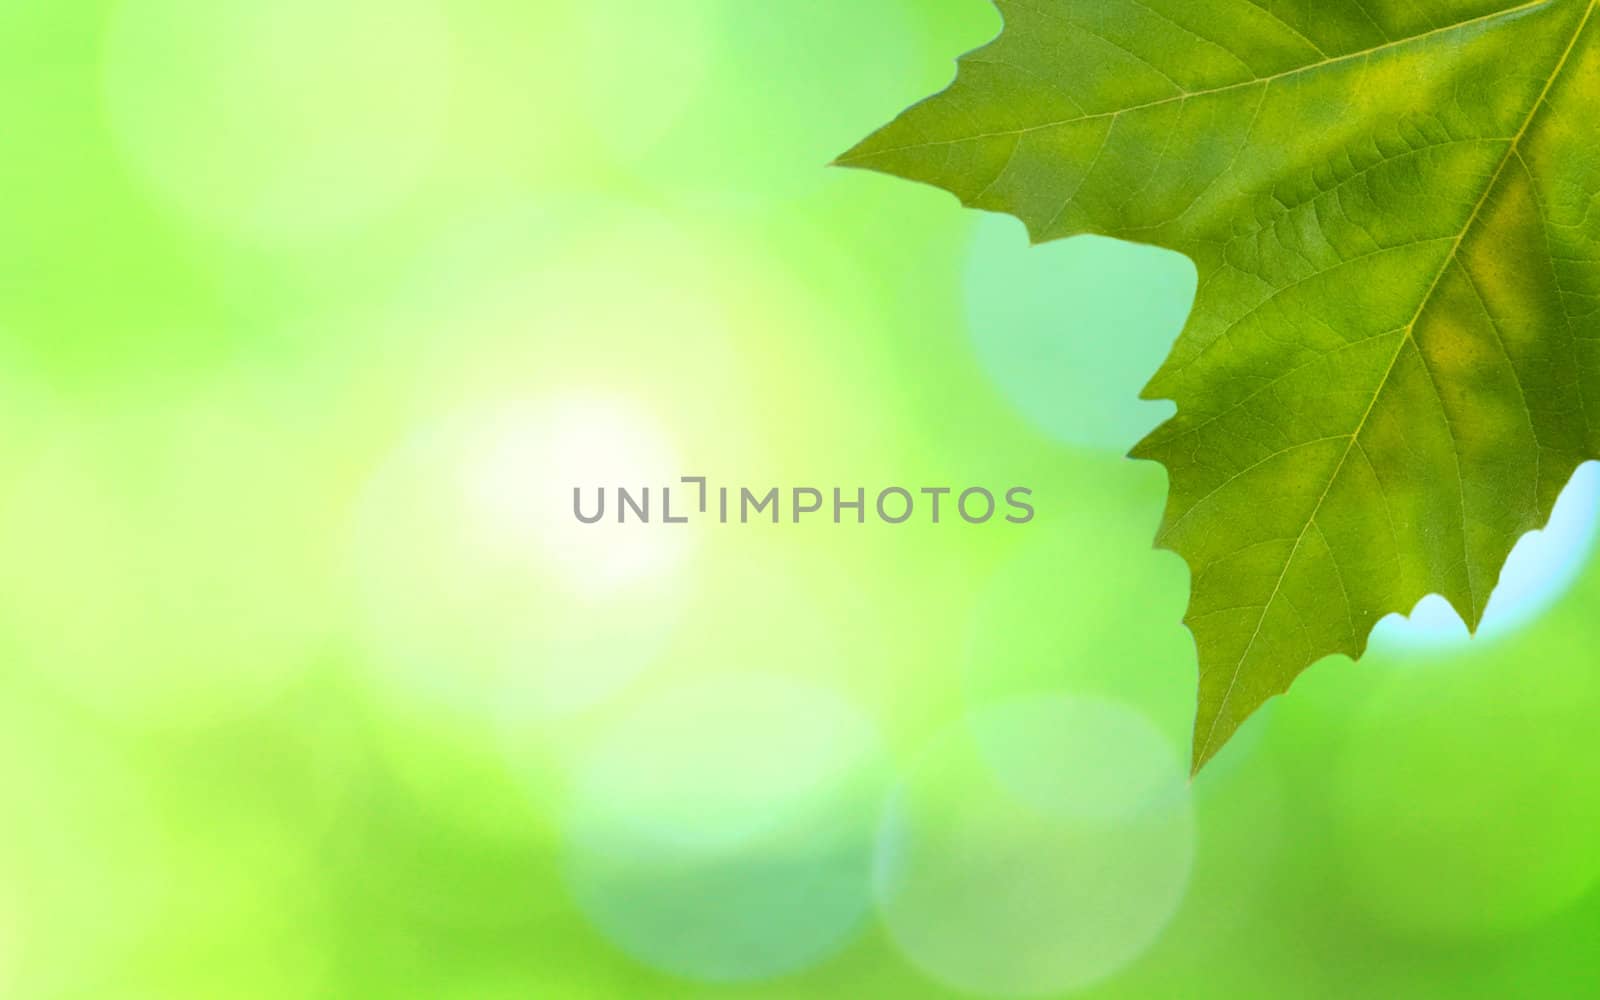 Beautiful green leaves with green background in spring by juweber